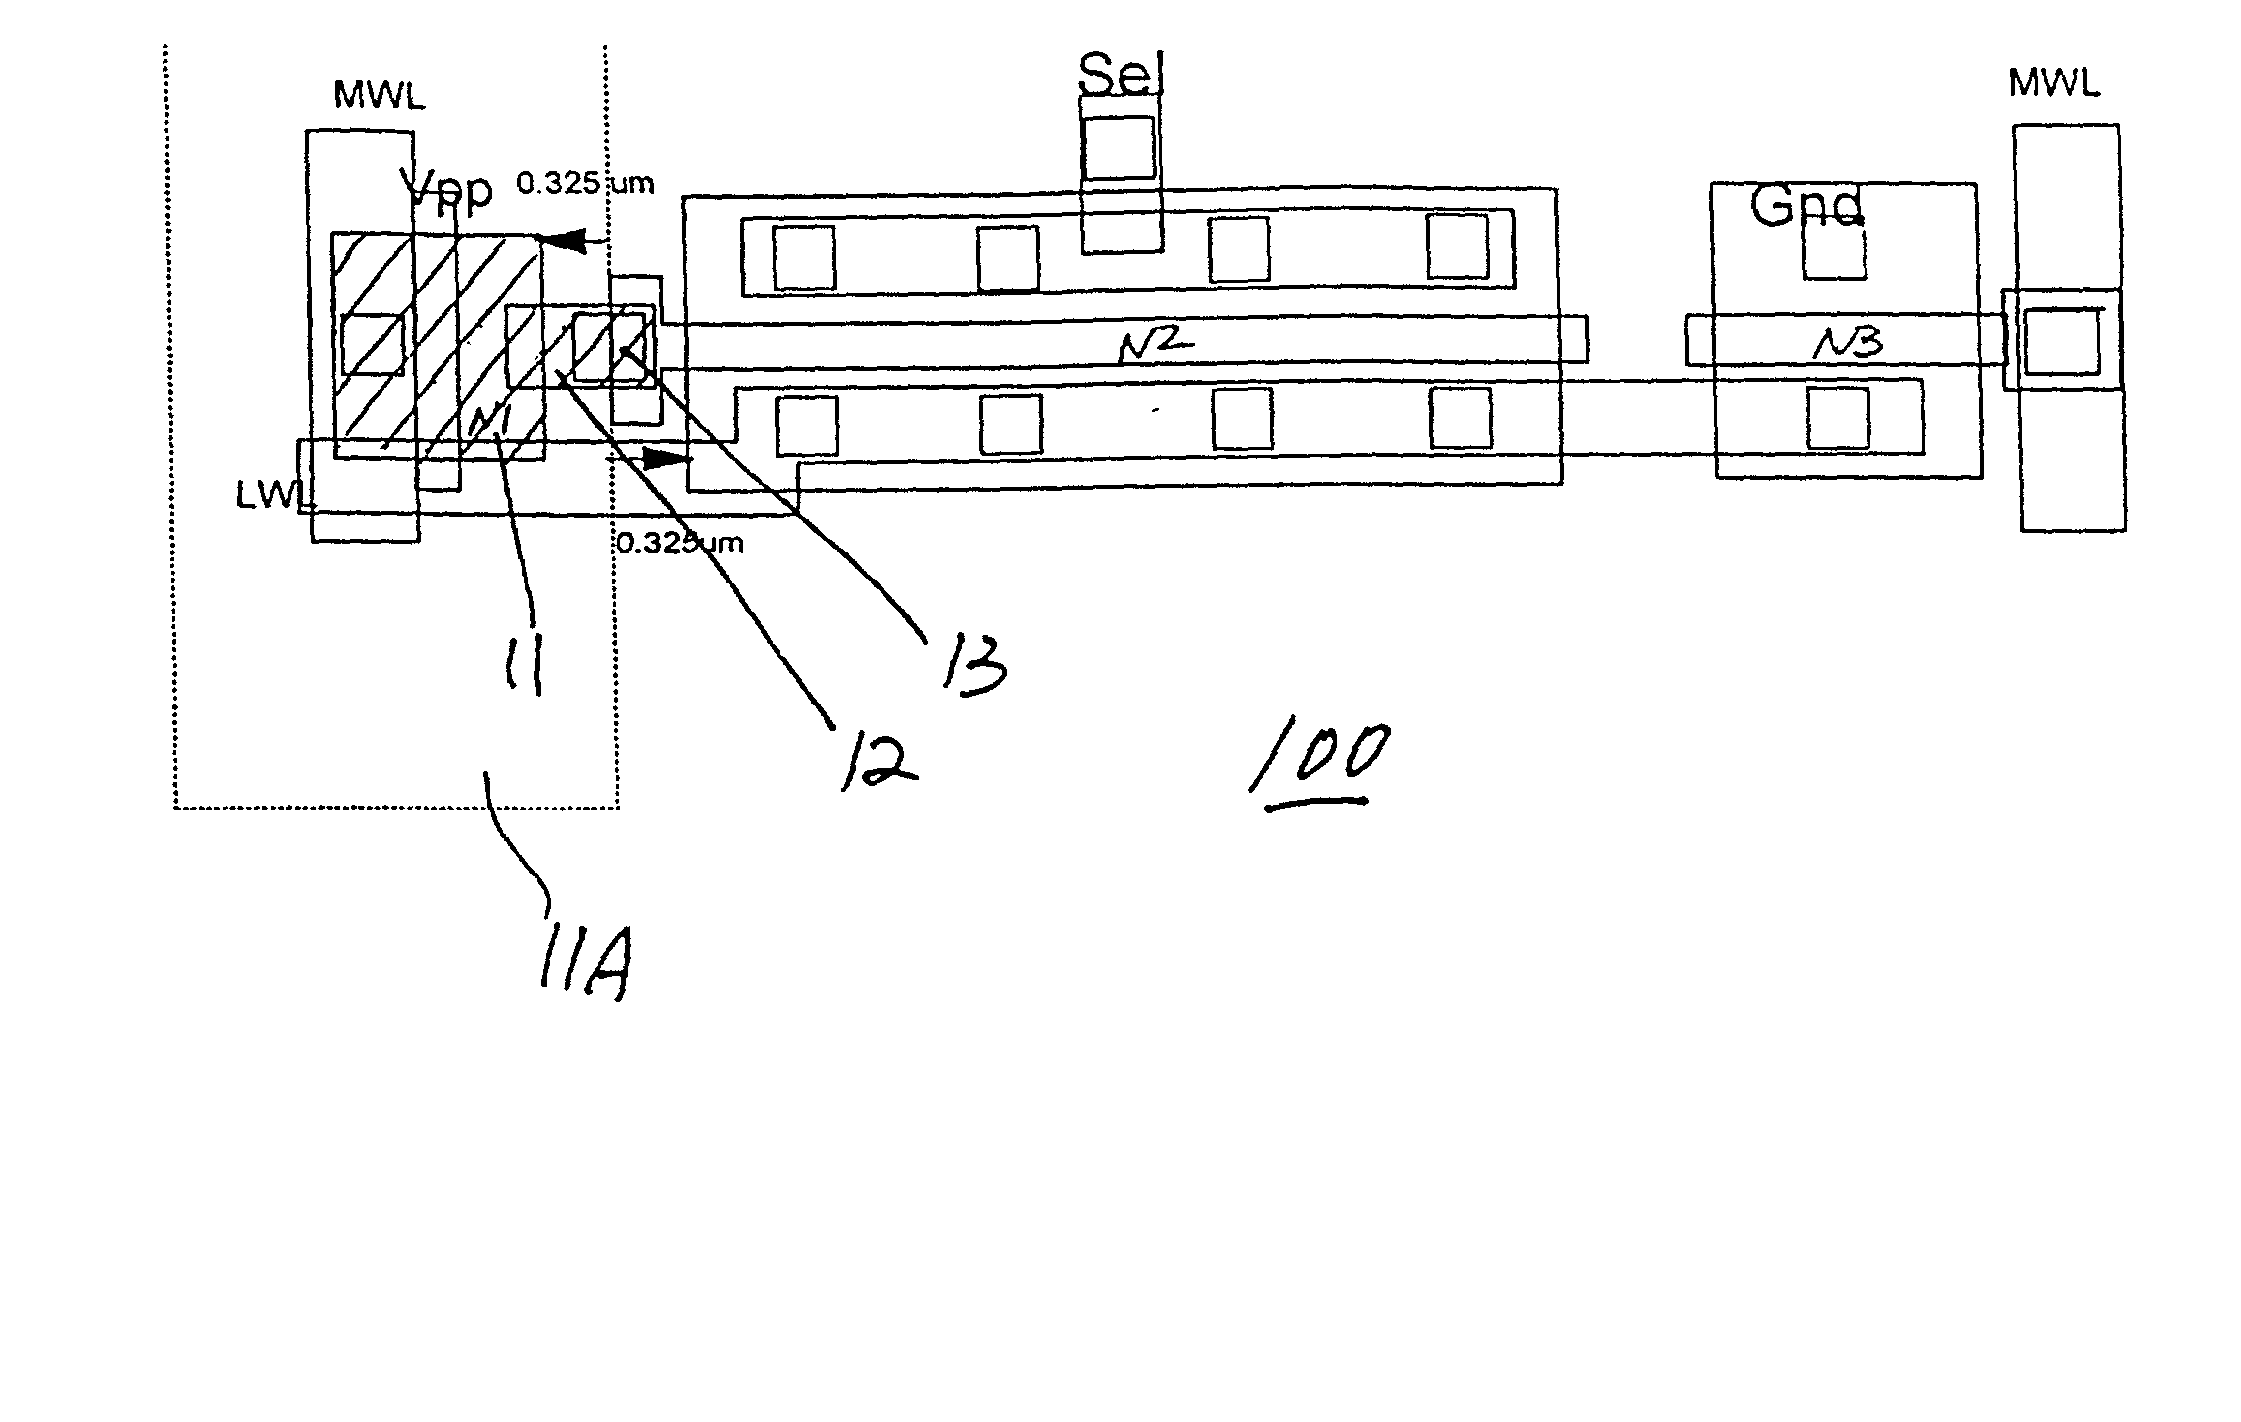 N-channel metal oxide semiconductor (NMOS) driver circuit and method of making same